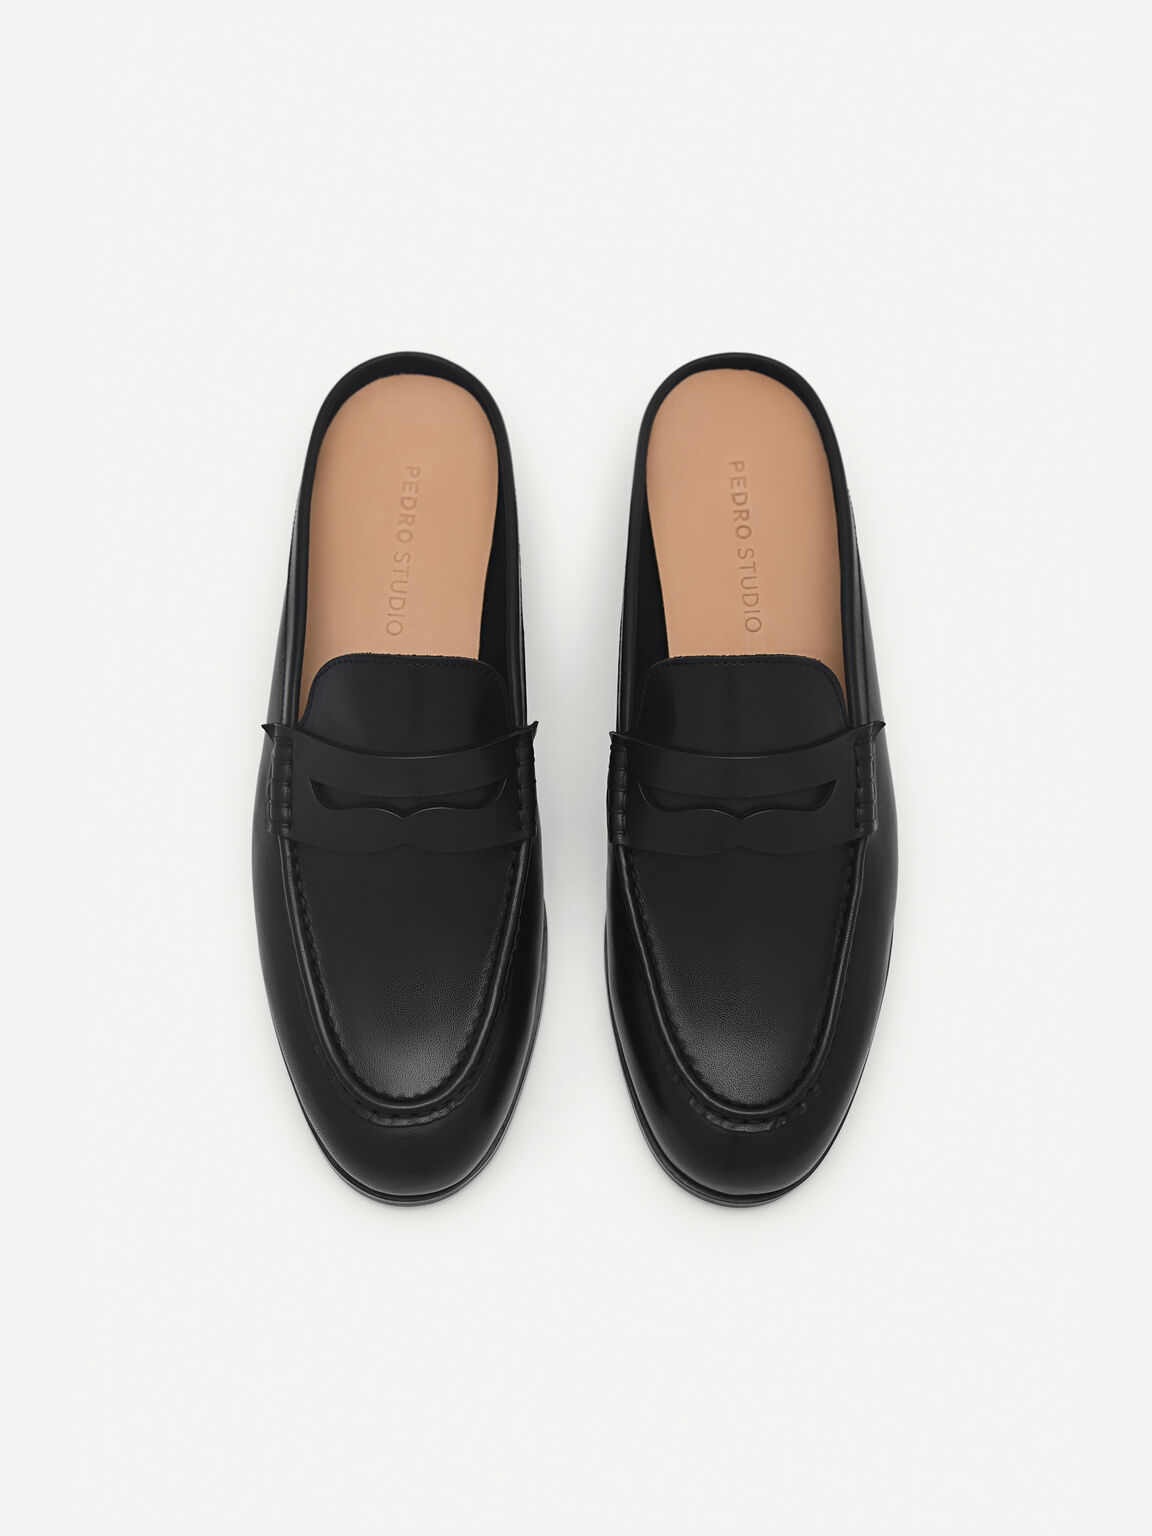 Blake Leather Penny Loafer Mules, Black